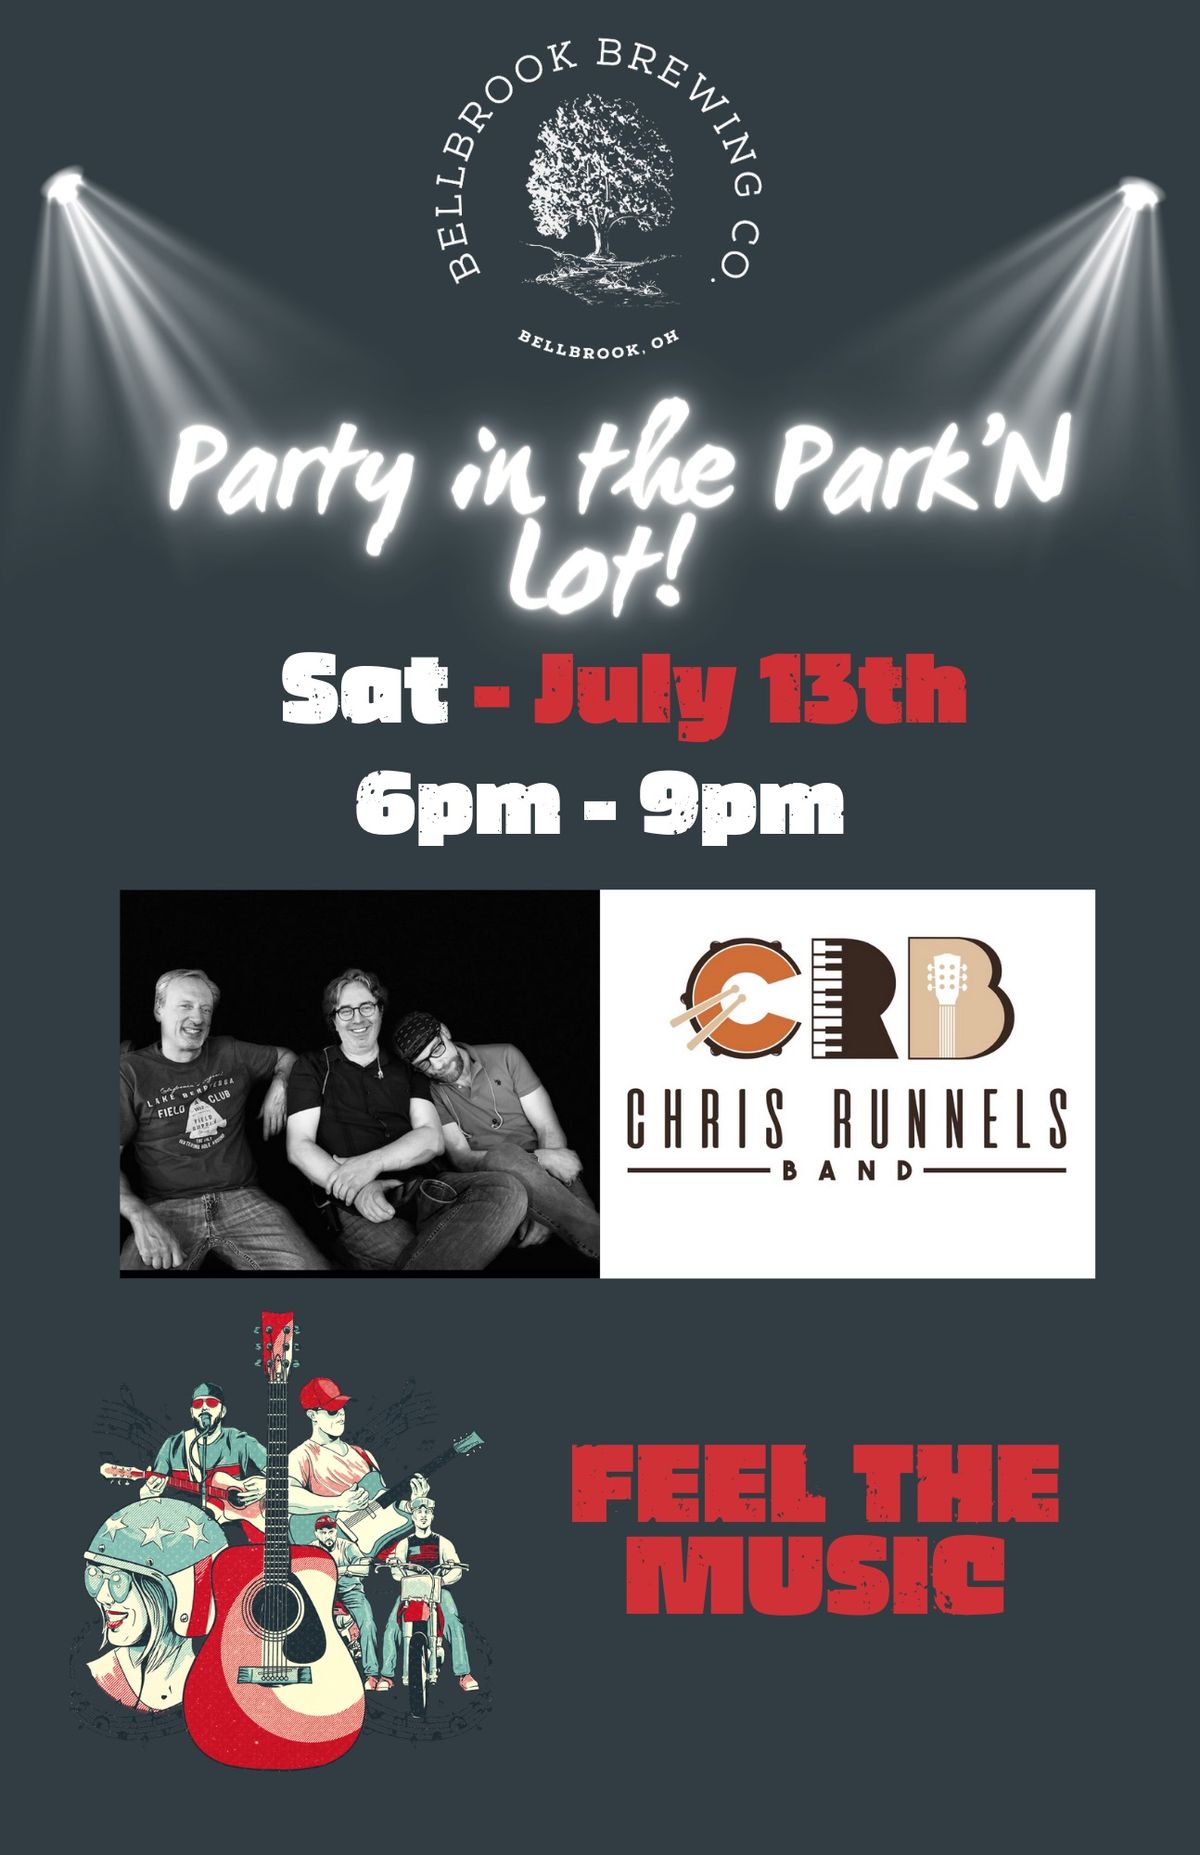 Party in the Park\u2019n Lot